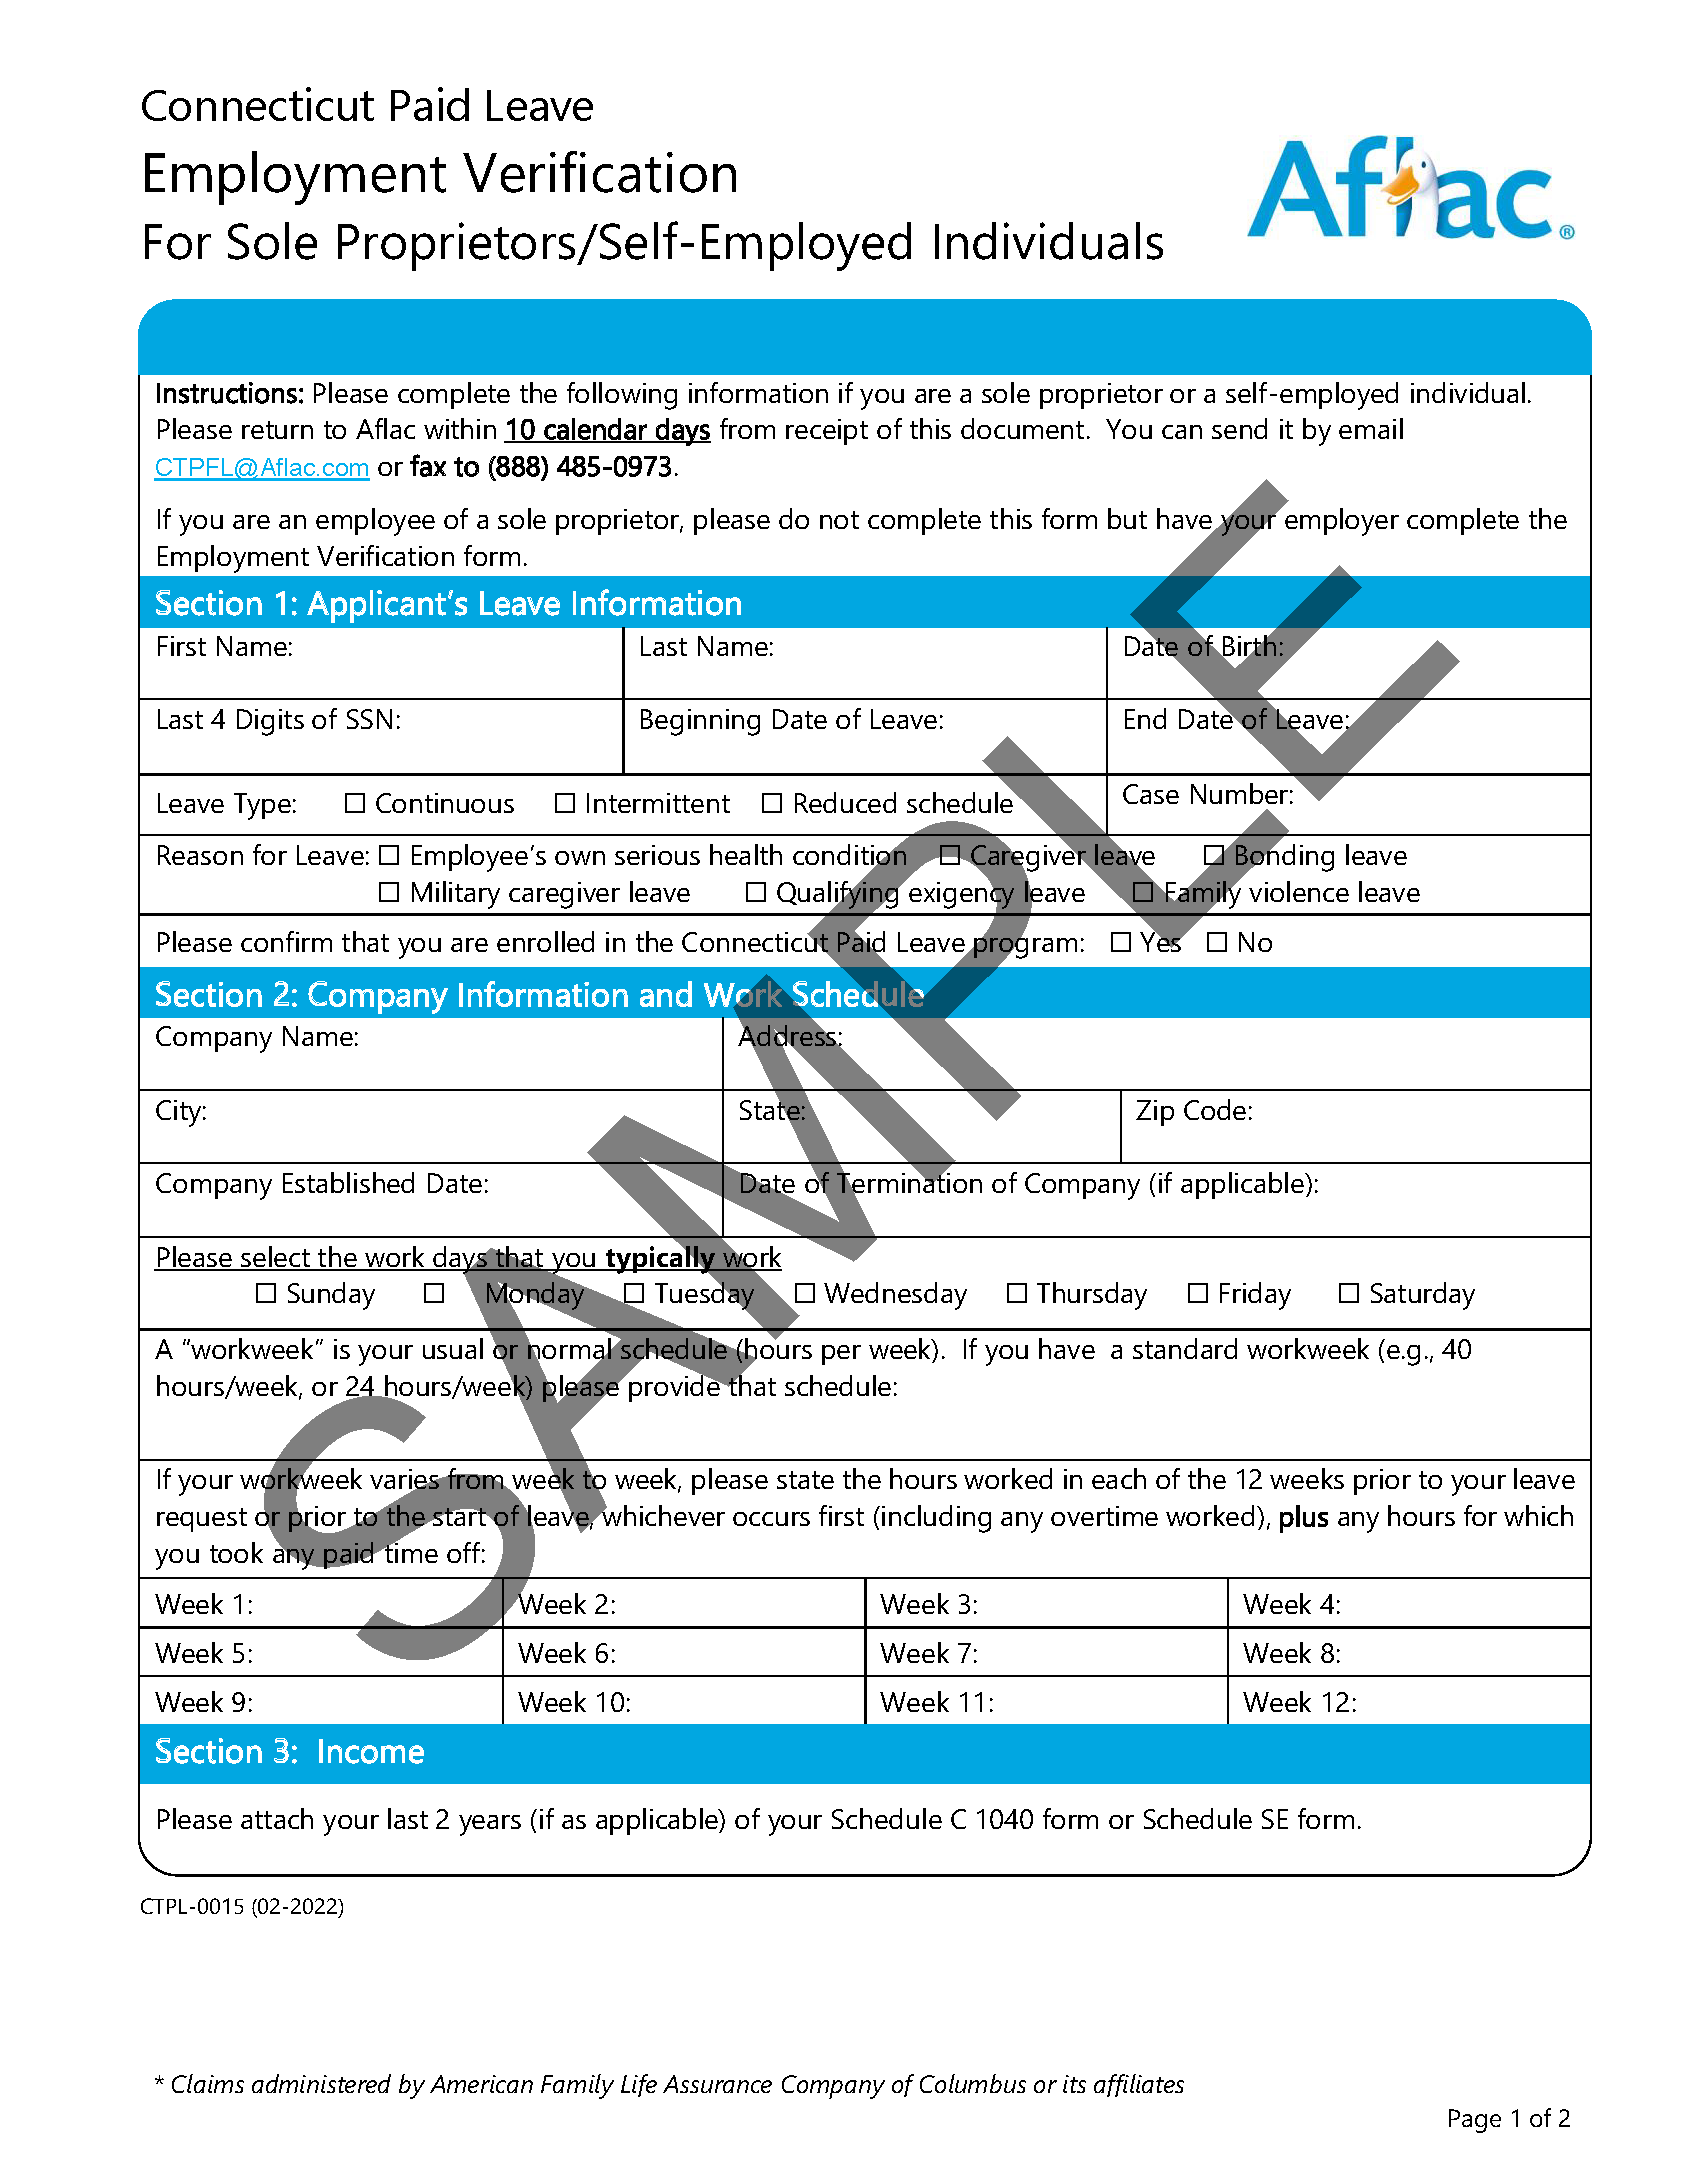 Sample Employment Verification Form for Sole Proprietors of Self-Employed 